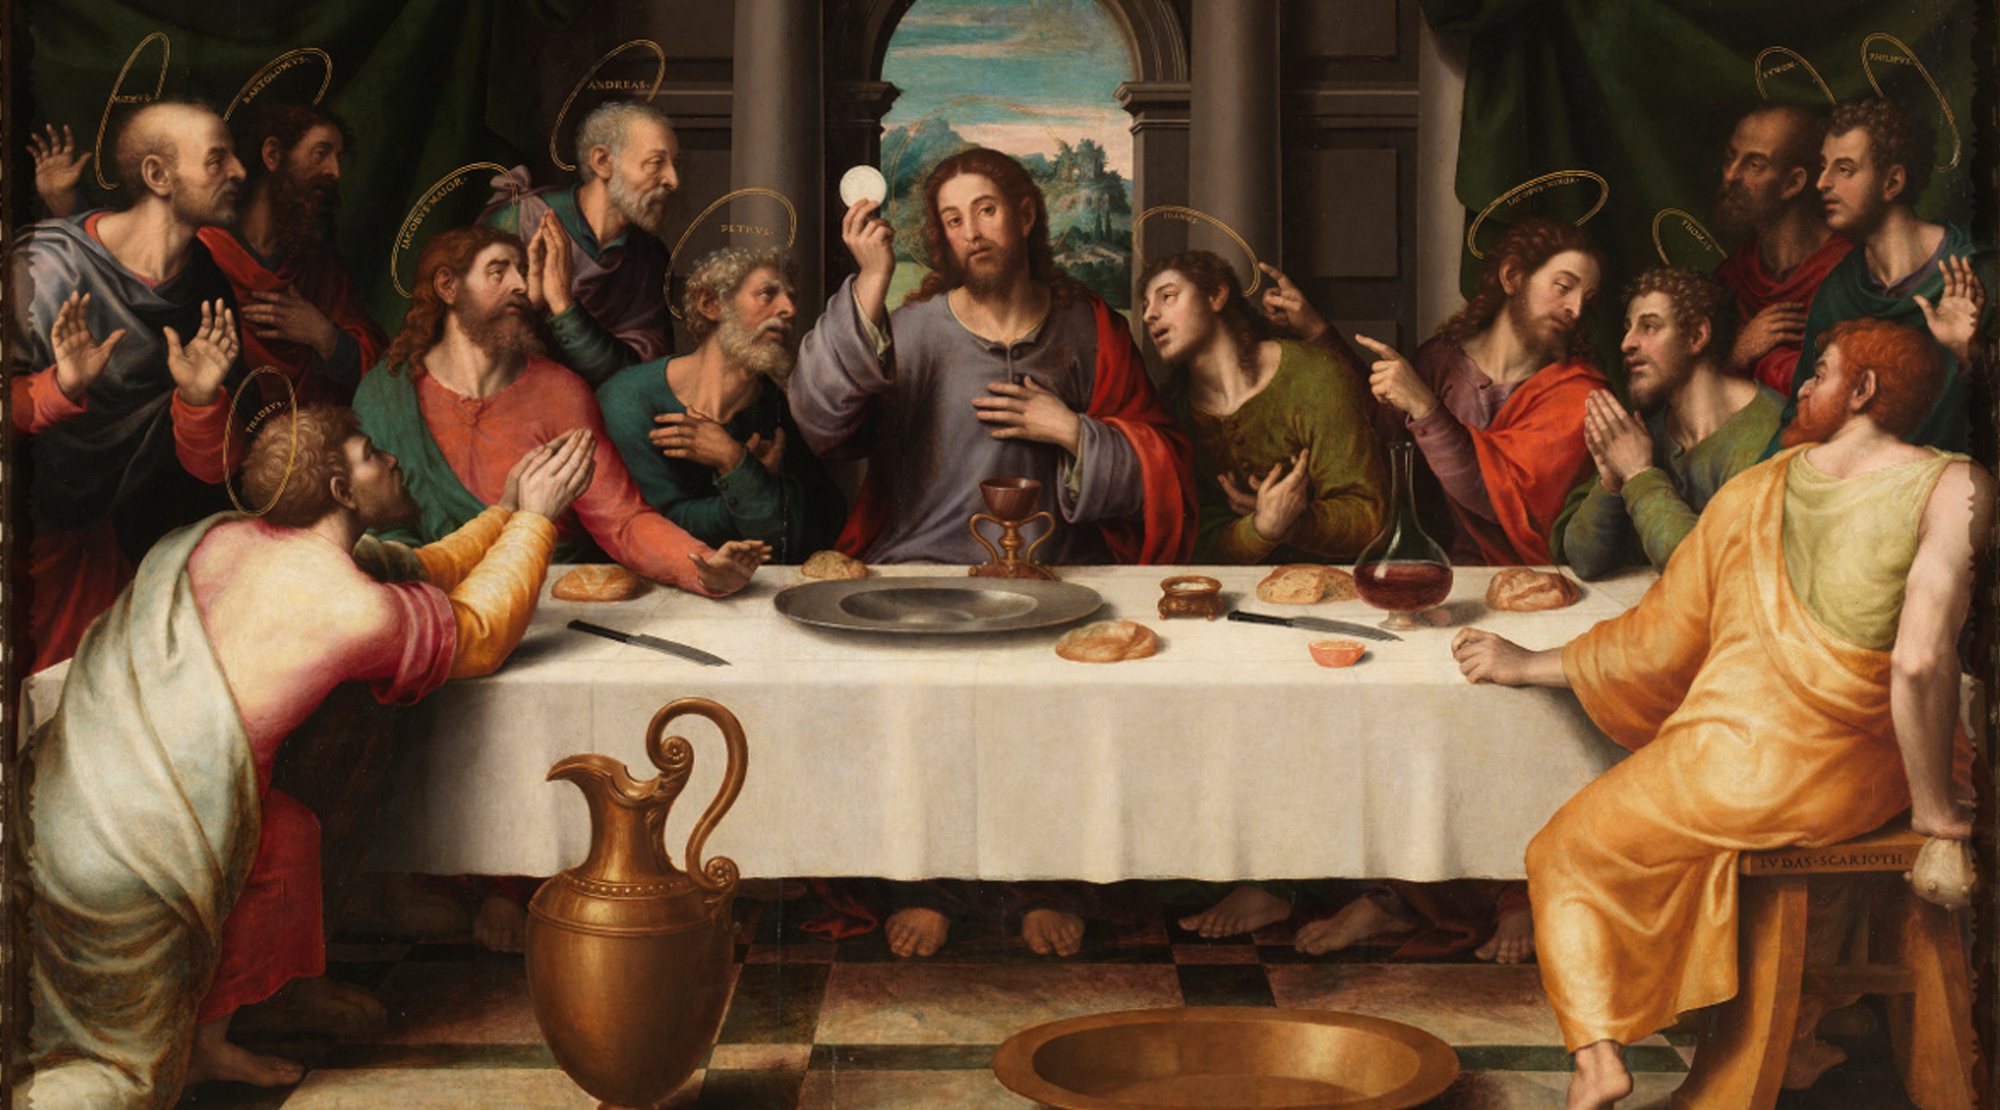 Judas Totally Drops the Ball and Calls It “The Last Supper” to ...